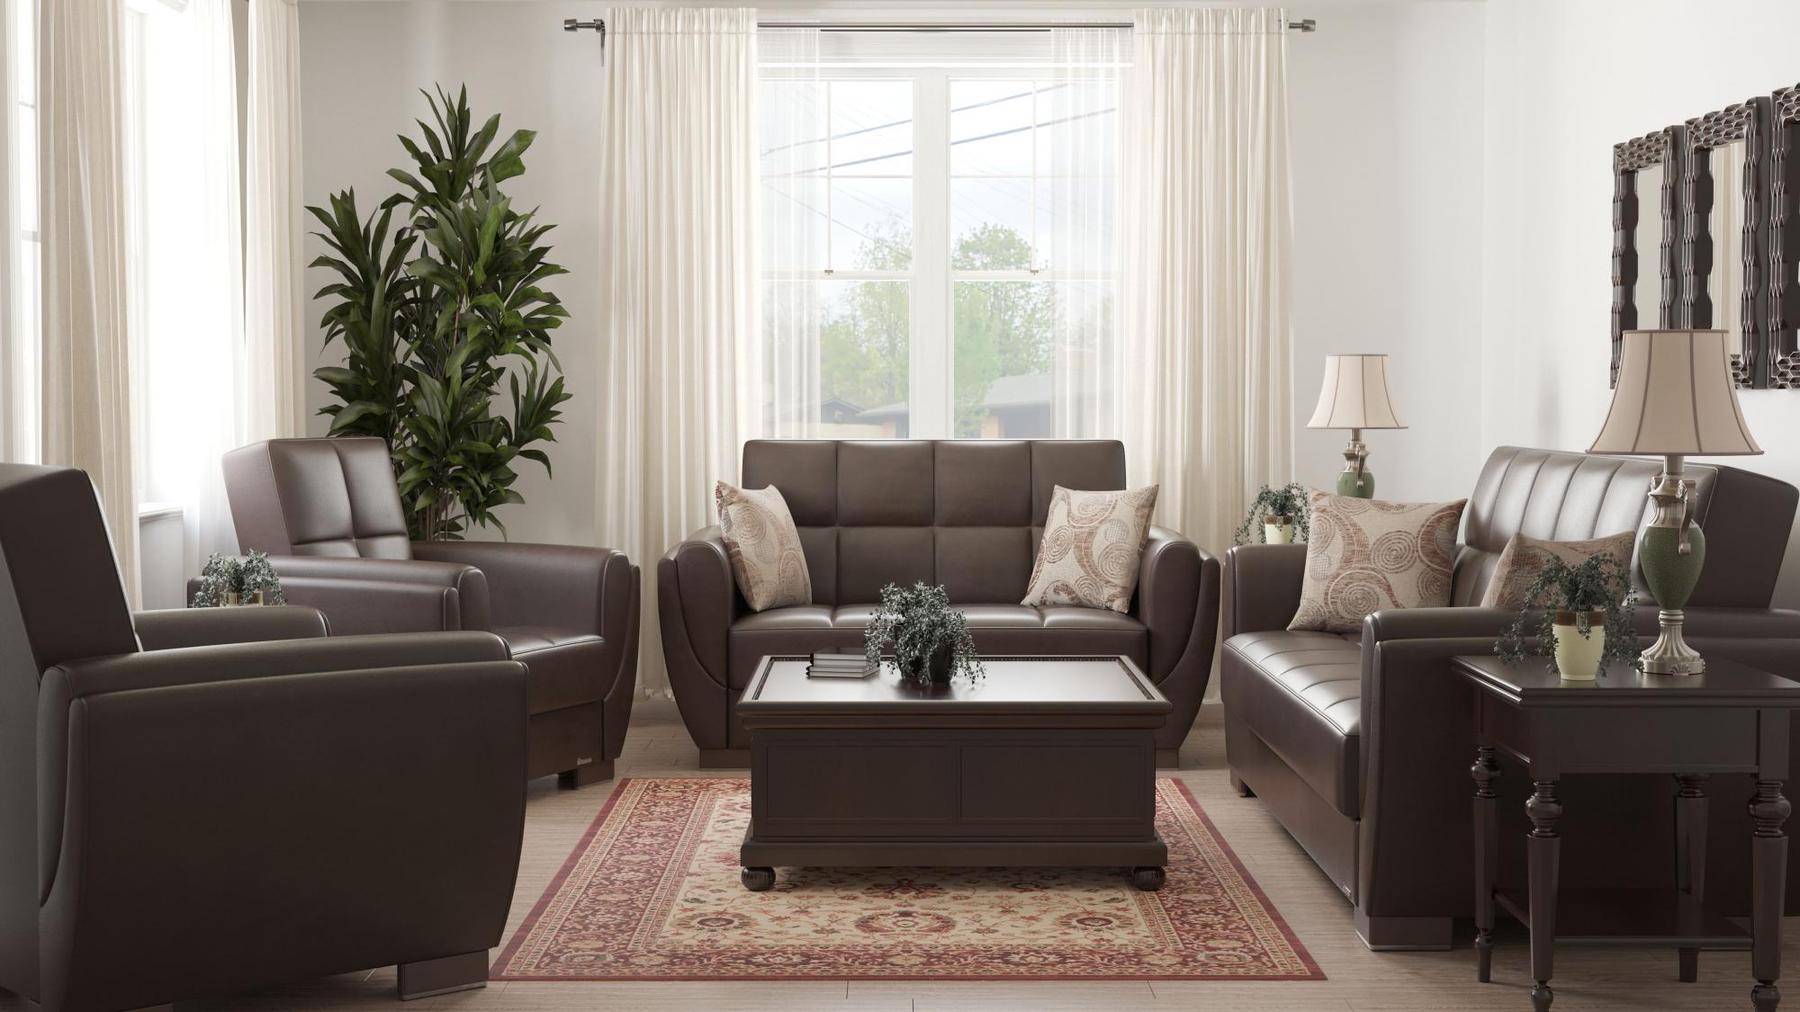 Modern design, Dark Brown , Artificial Leather upholstered convertible sleeper Loveseat with underseat storage from Voyage Shelter by Ottomanson in living room lifestyle setting with the matching furniture set. This Loveseat measures 71 inches width by 36 inches depth by 41 inches height.